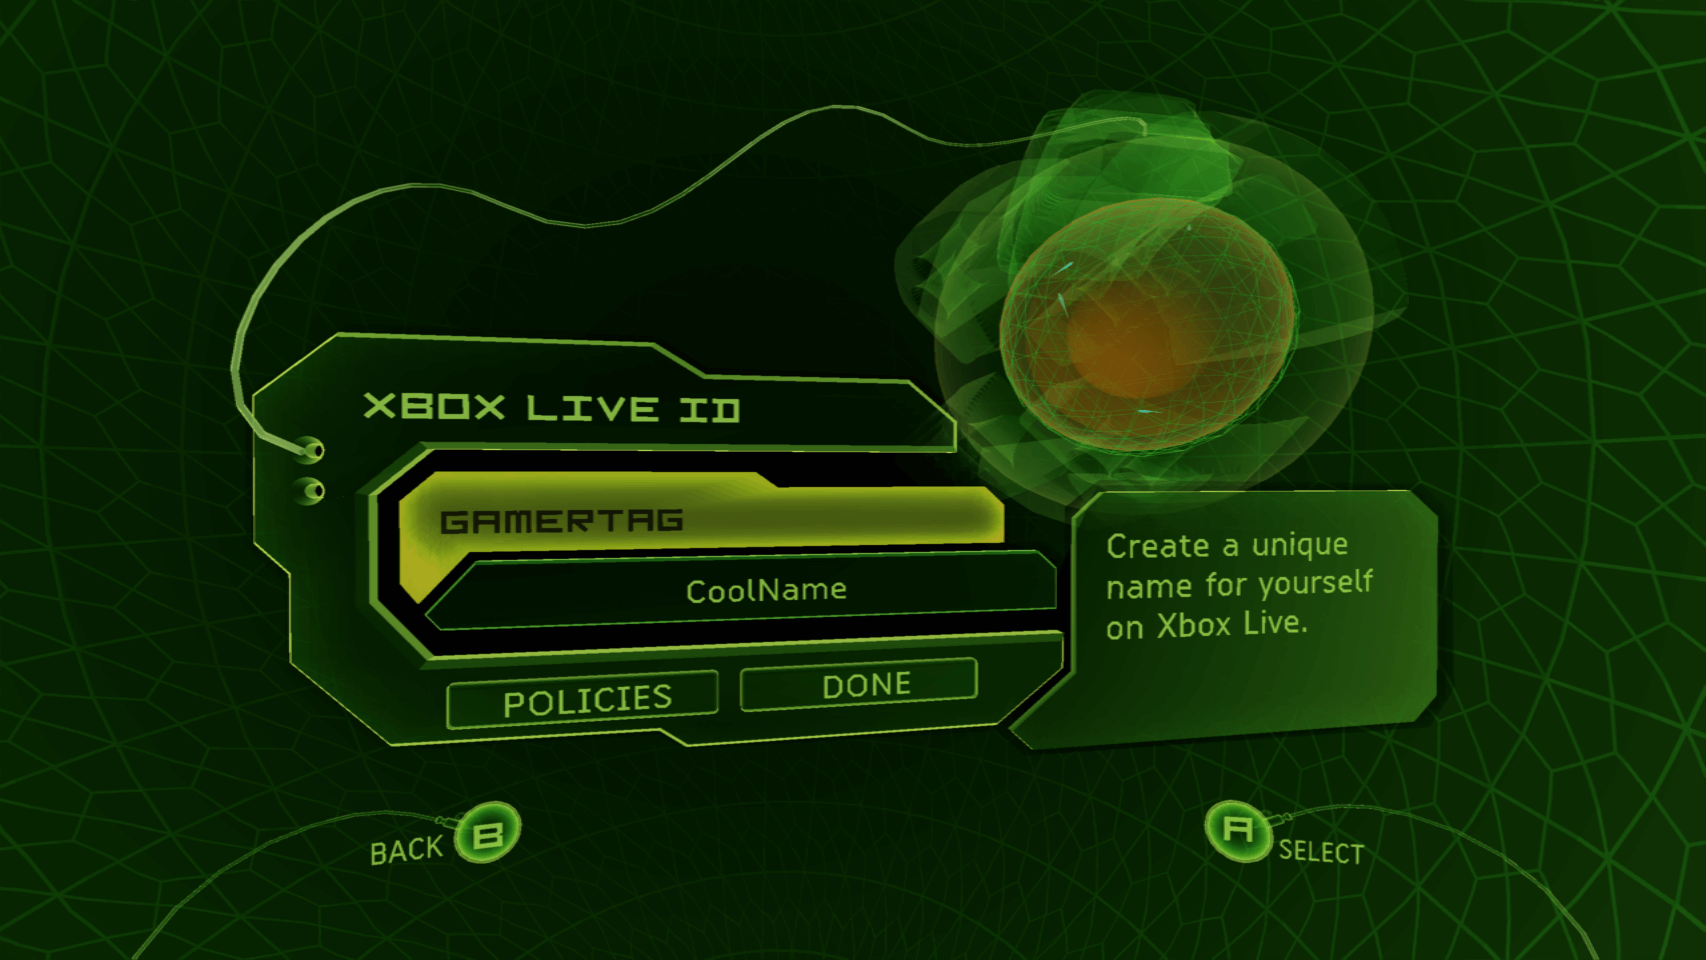 Gamertag input screen, with the gamertag "CoolName" entered.